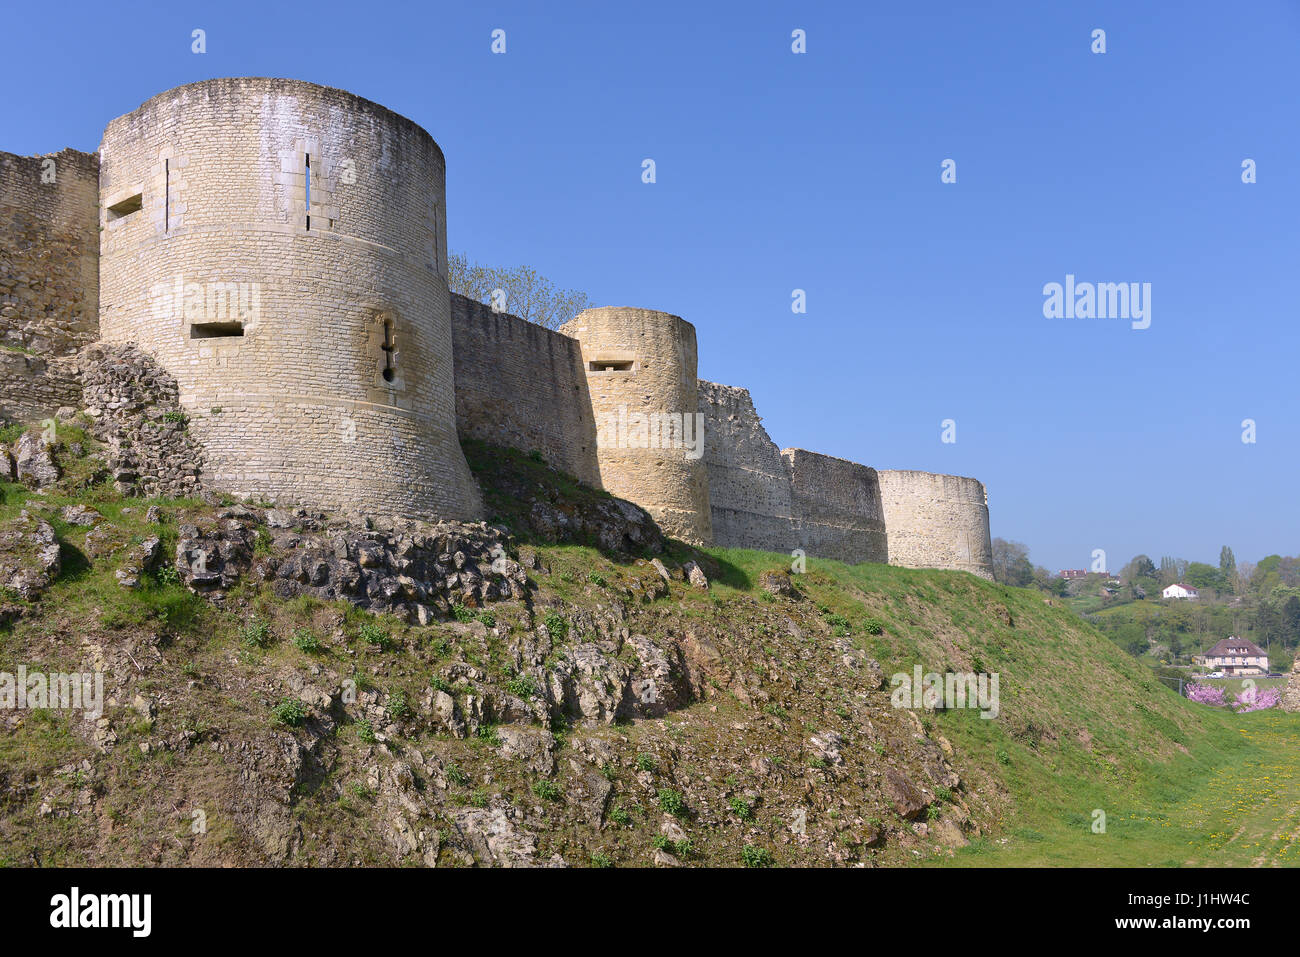 Castle of William the Conqueror of Falaise, a commune in the Calvados department in the Basse-Normandie region in northwestern France Stock Photo